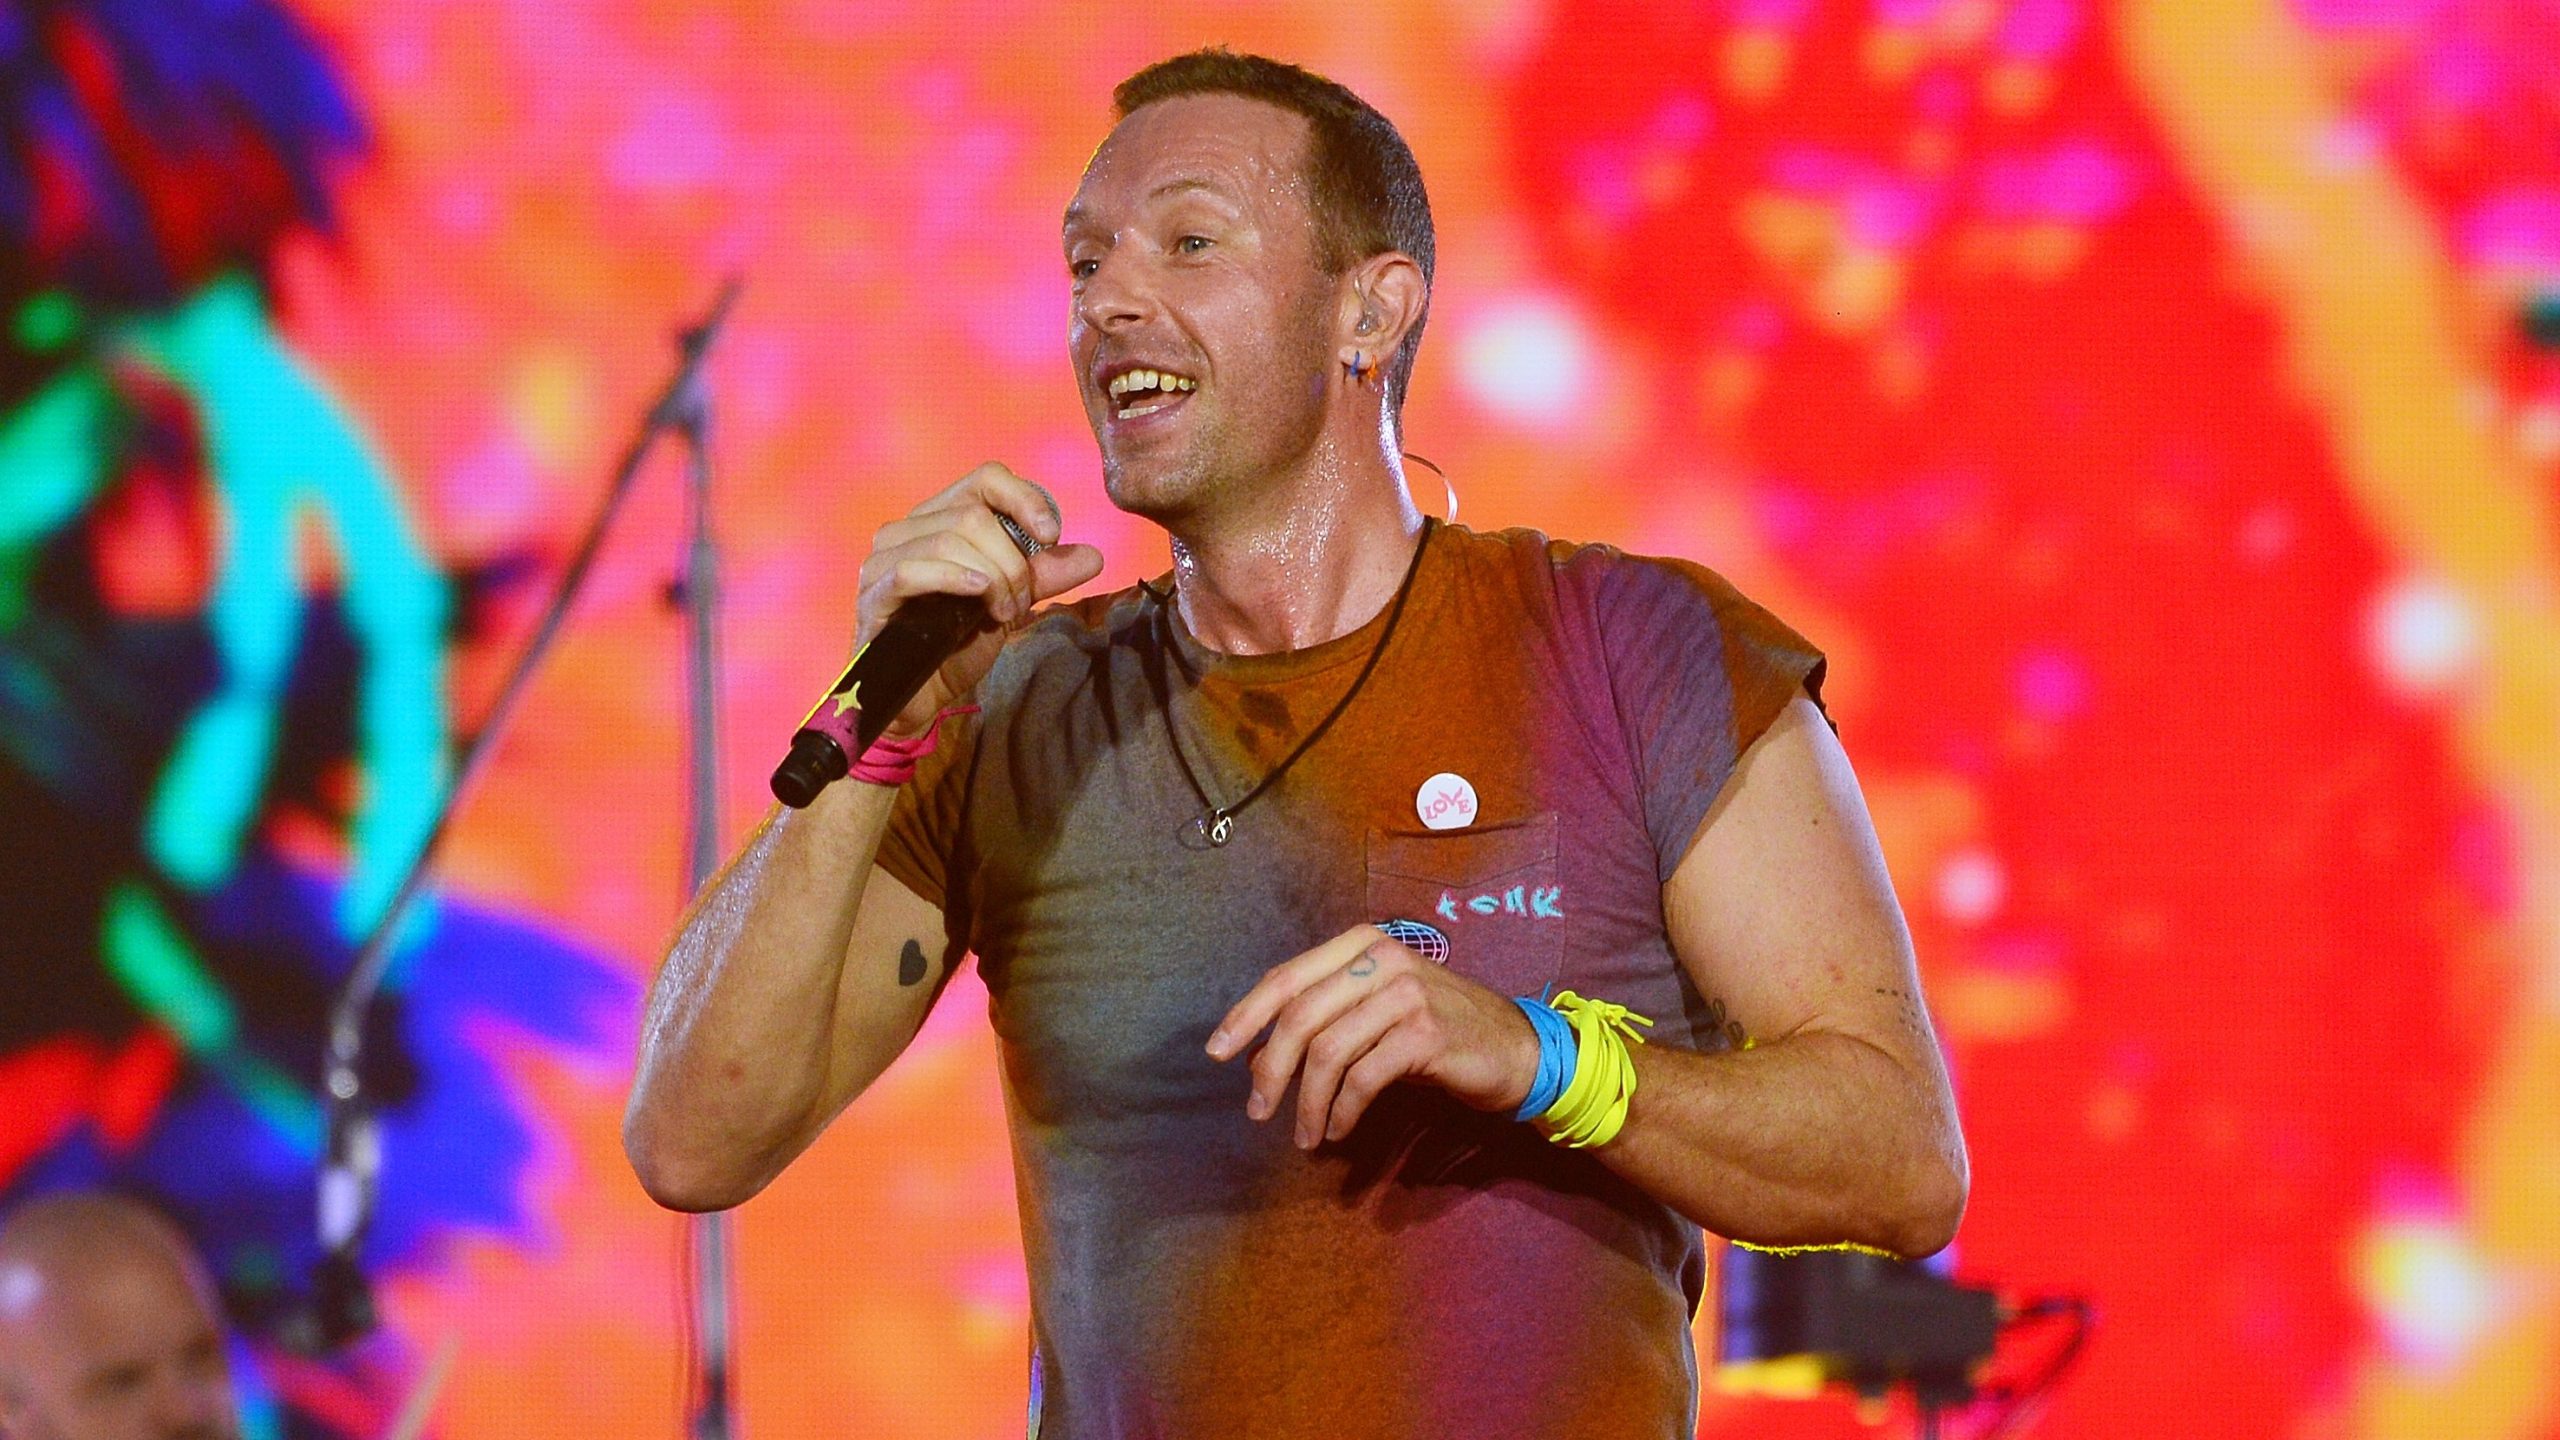 Chris Martin's Kindness Shines as He Drives Fan to Coldplay Show